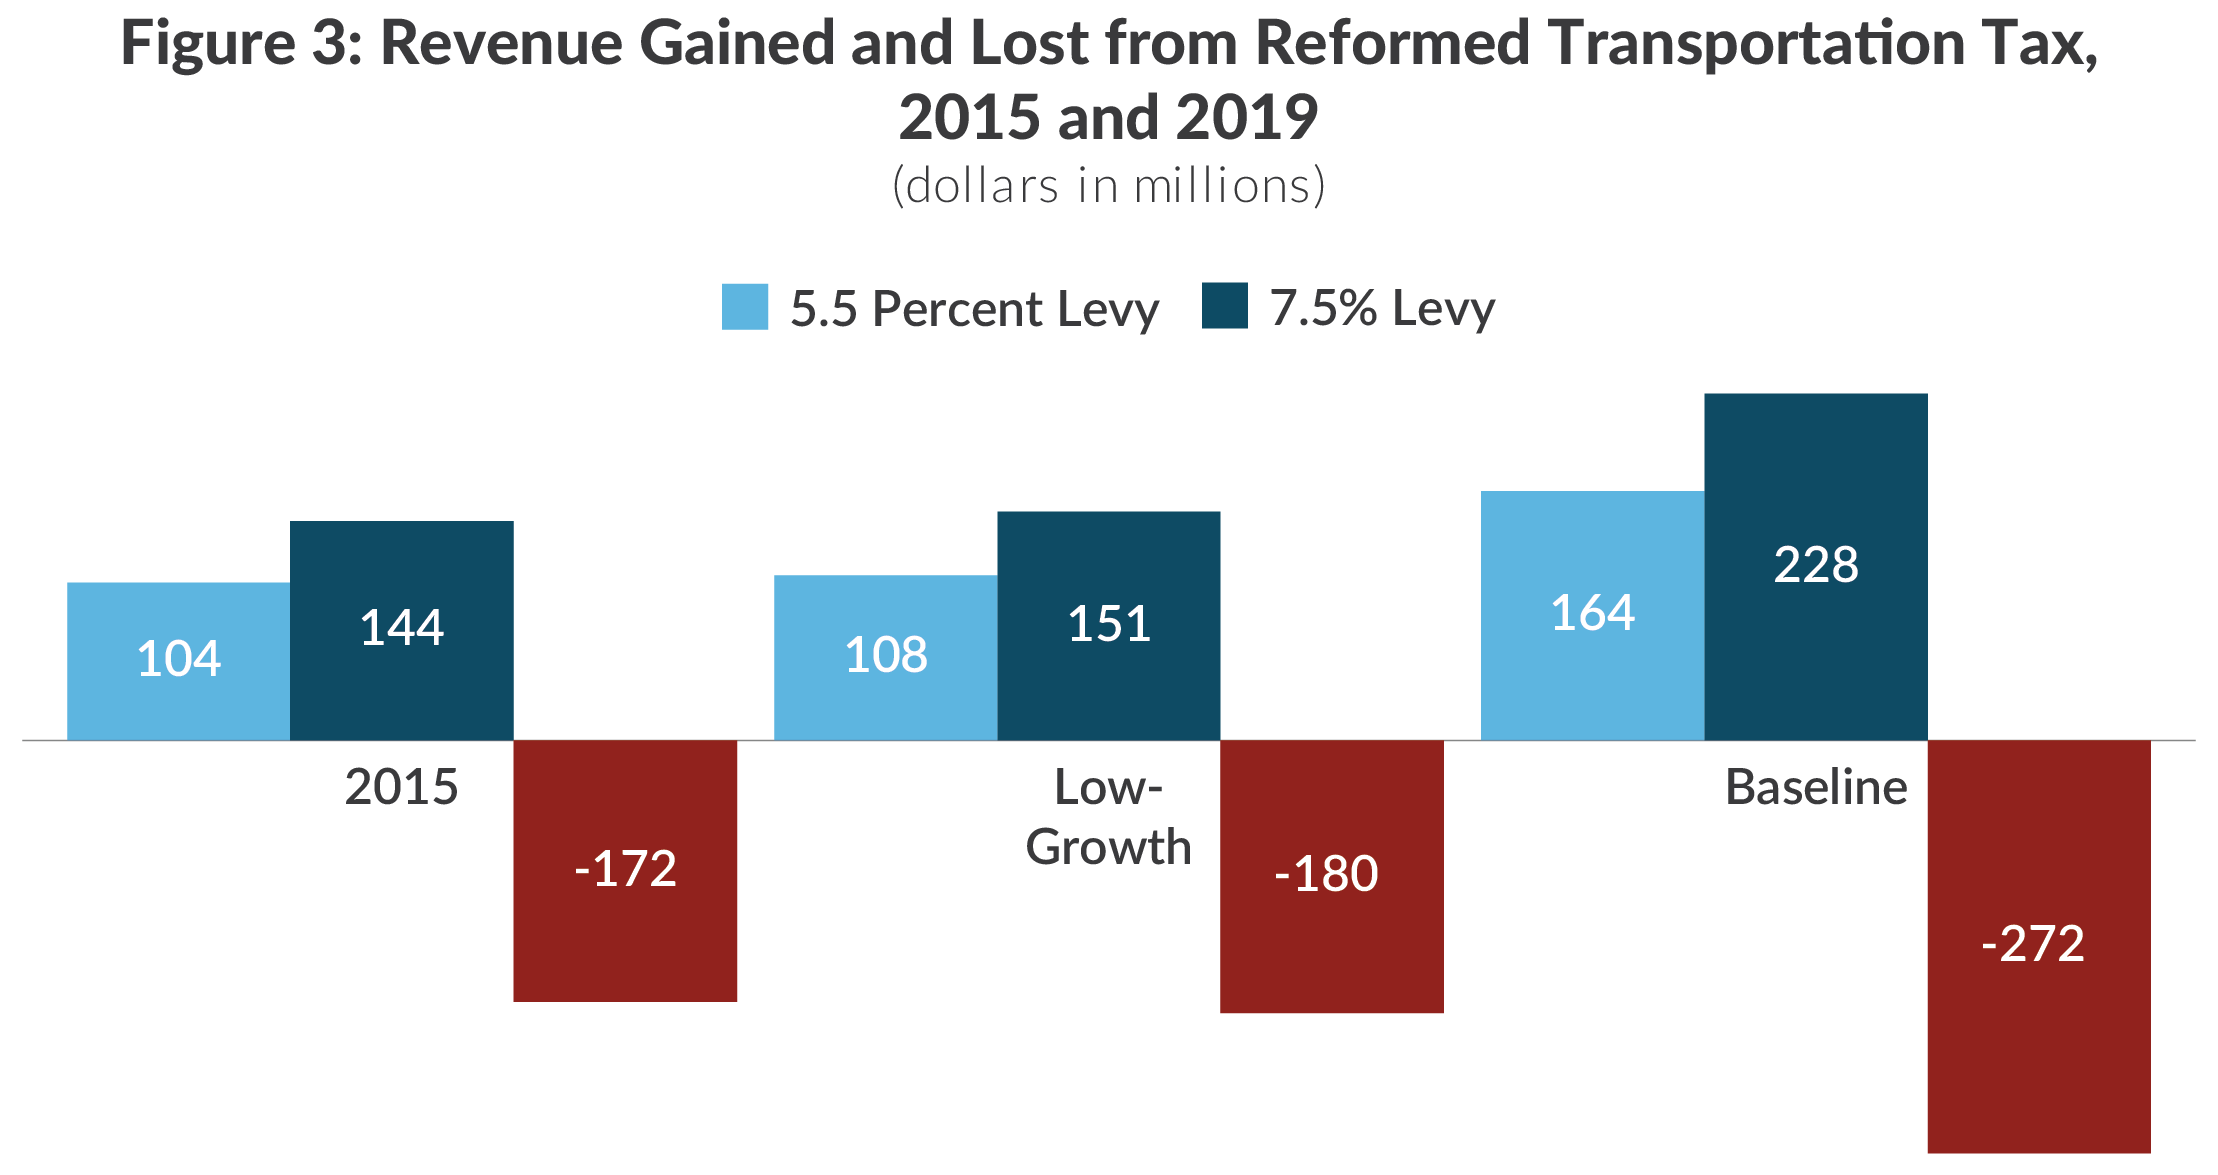 Grouped column chart showing revenue gained and lost from reformed transportation sales tax in New York State, 2015 and 2019